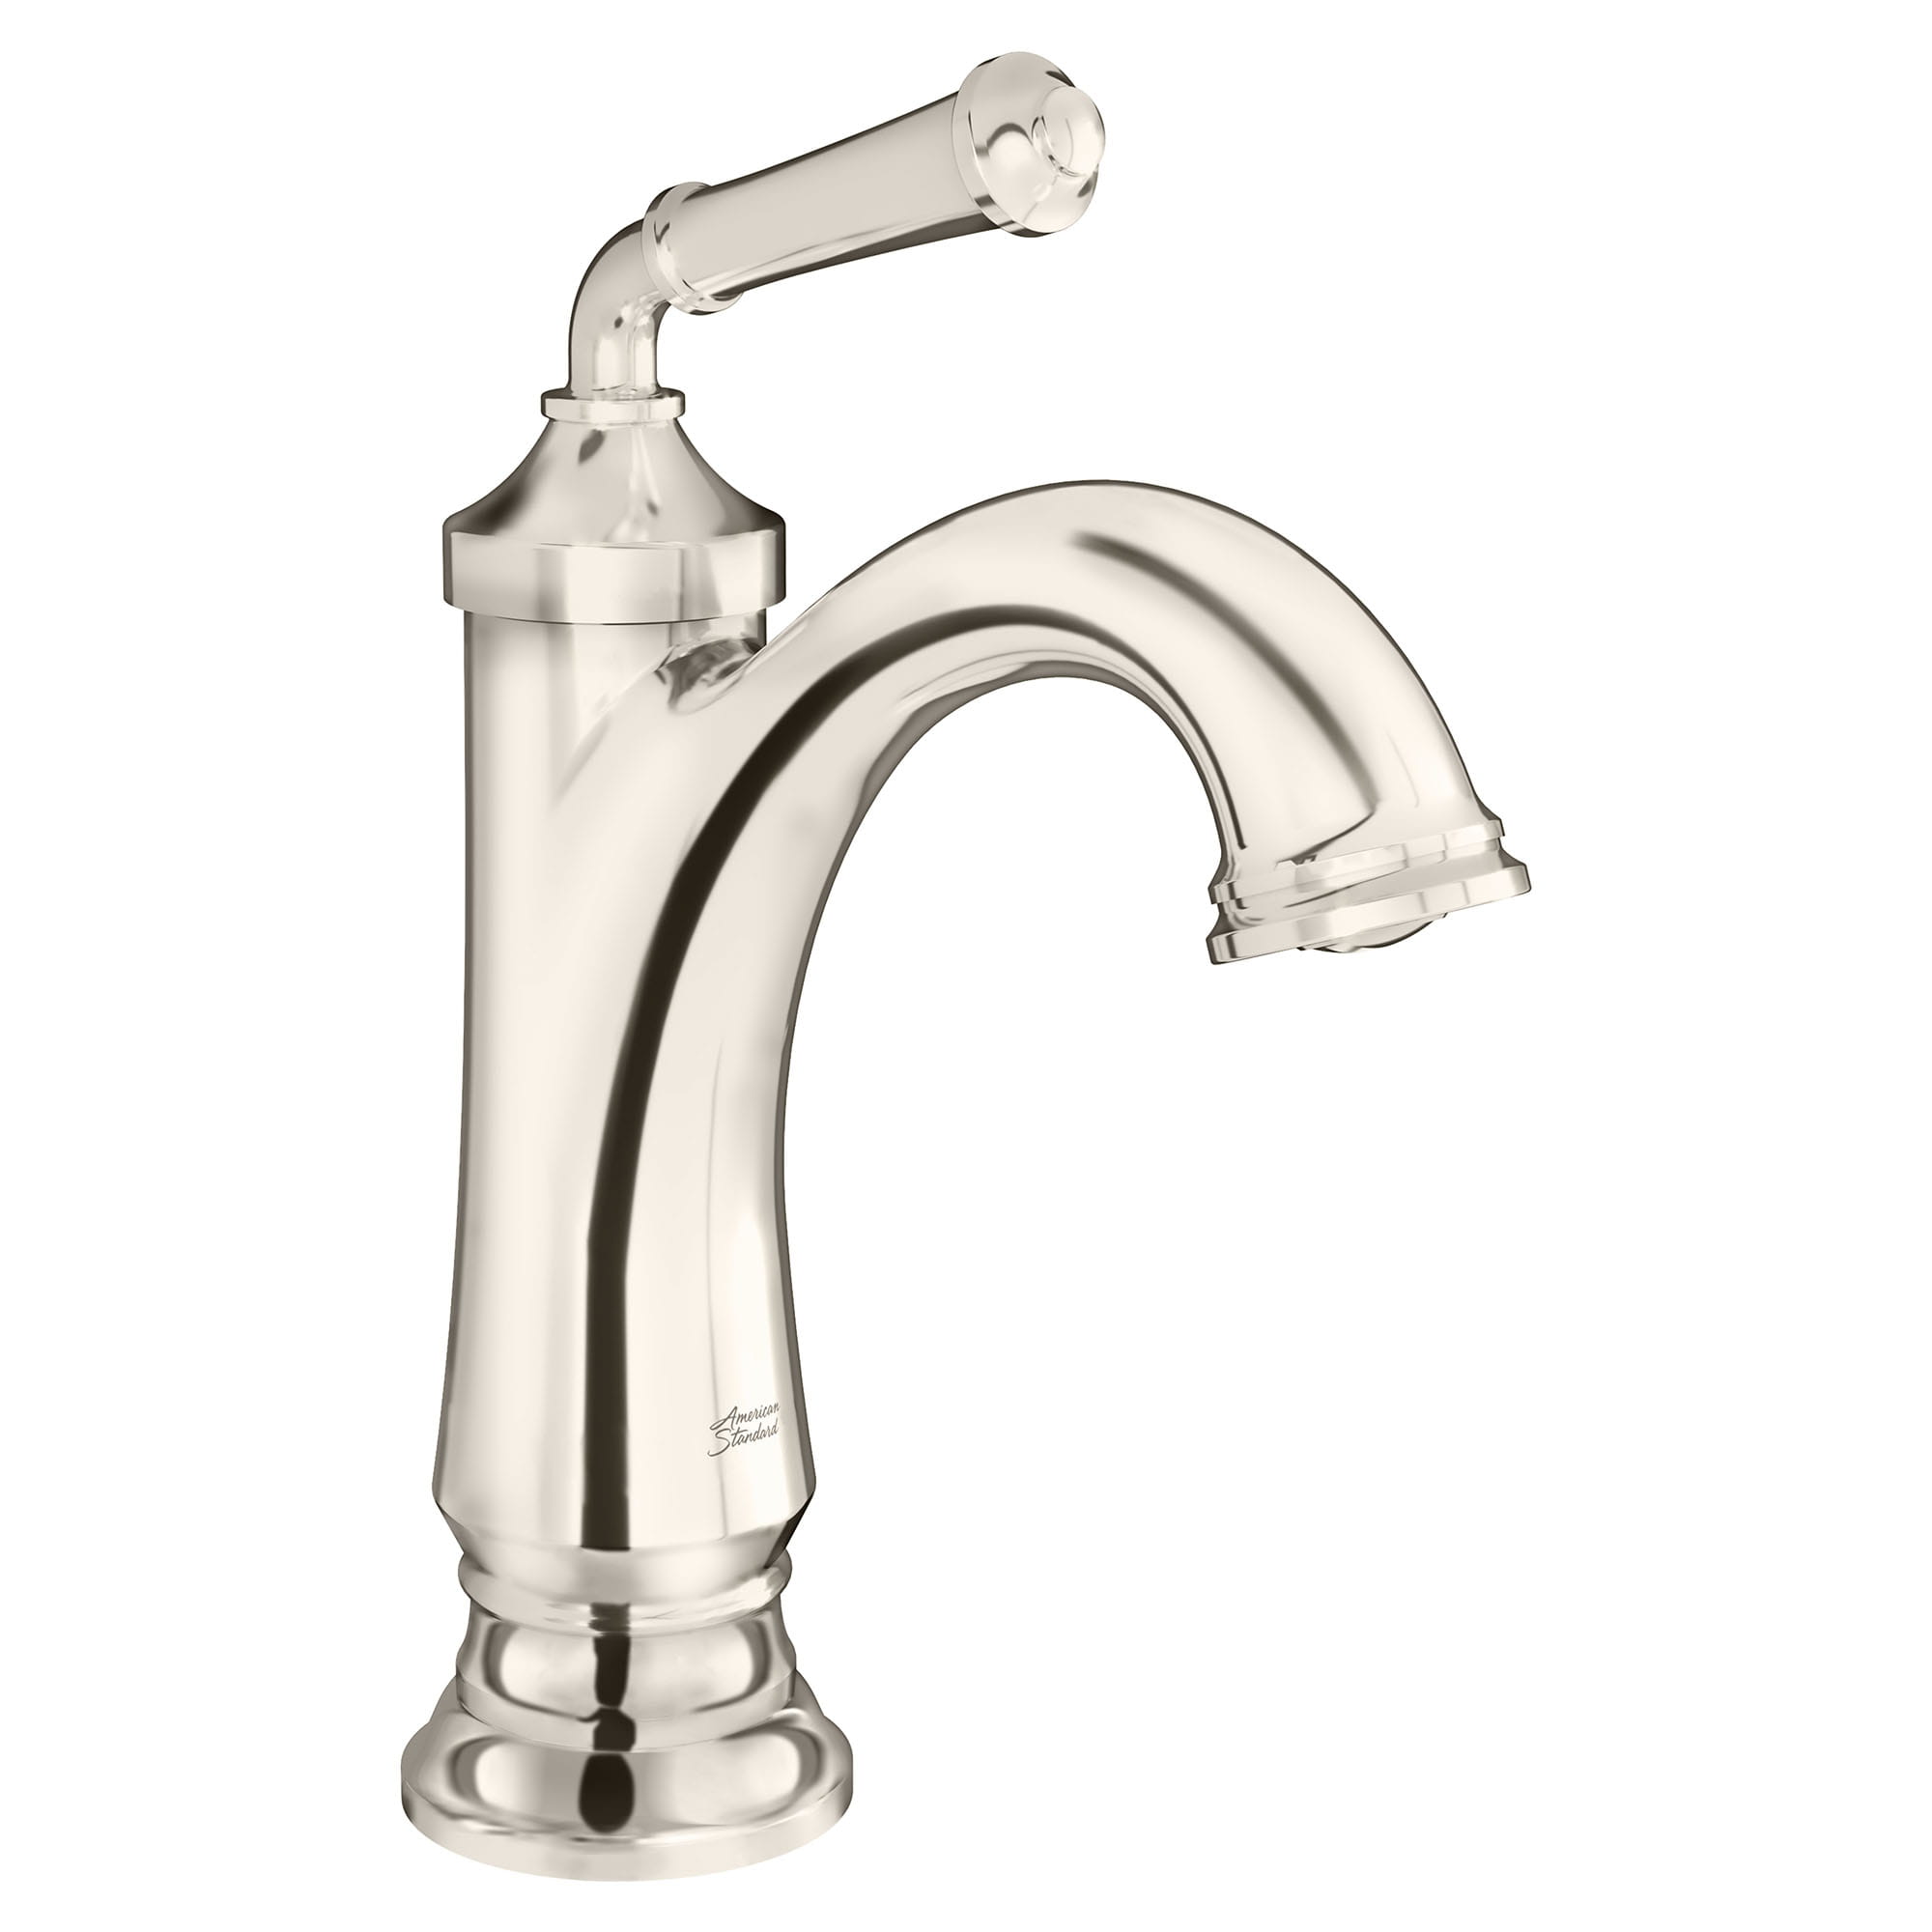 Delancey Single Hole Single Handle Bathroom Faucet 12 gpm 45 L min With Lever Handle POLISHED  NICKEL